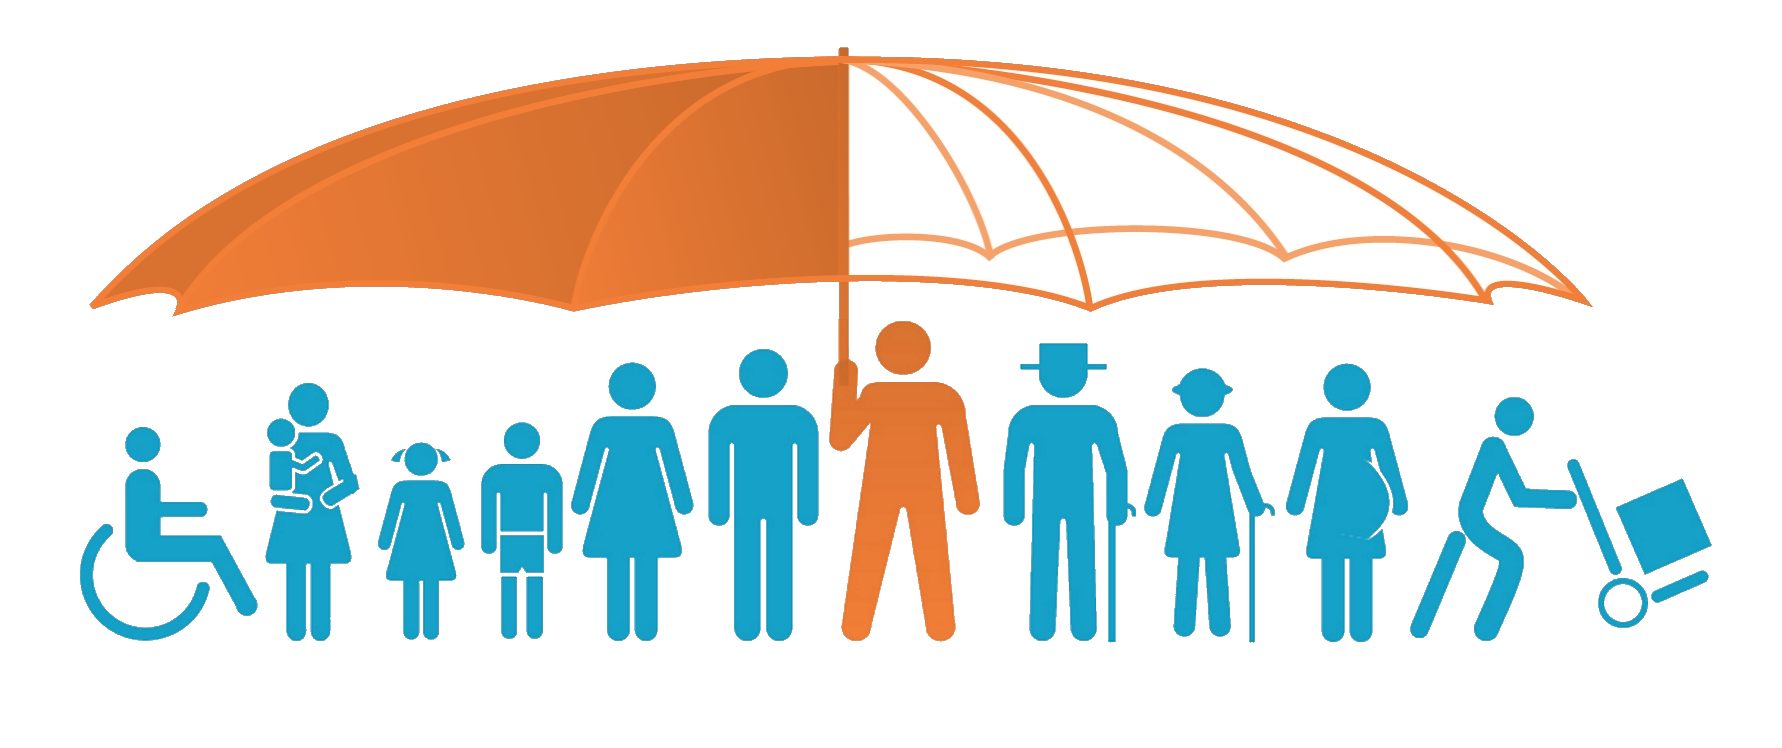 Insurance going beyond the. Group clipart social group